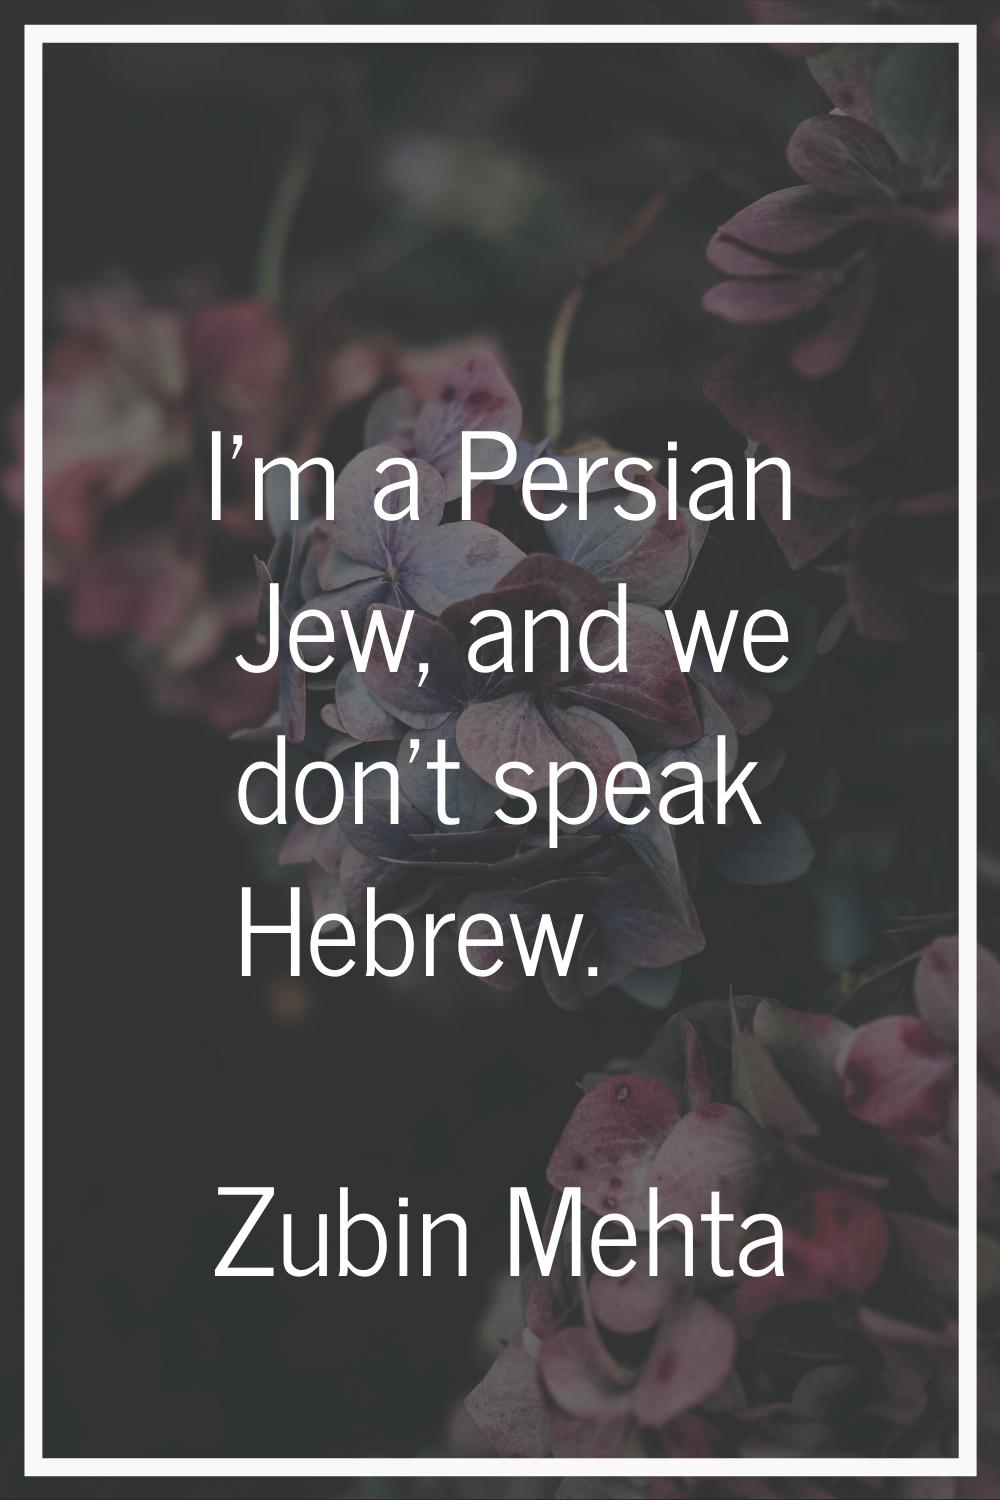 I'm a Persian Jew, and we don't speak Hebrew.